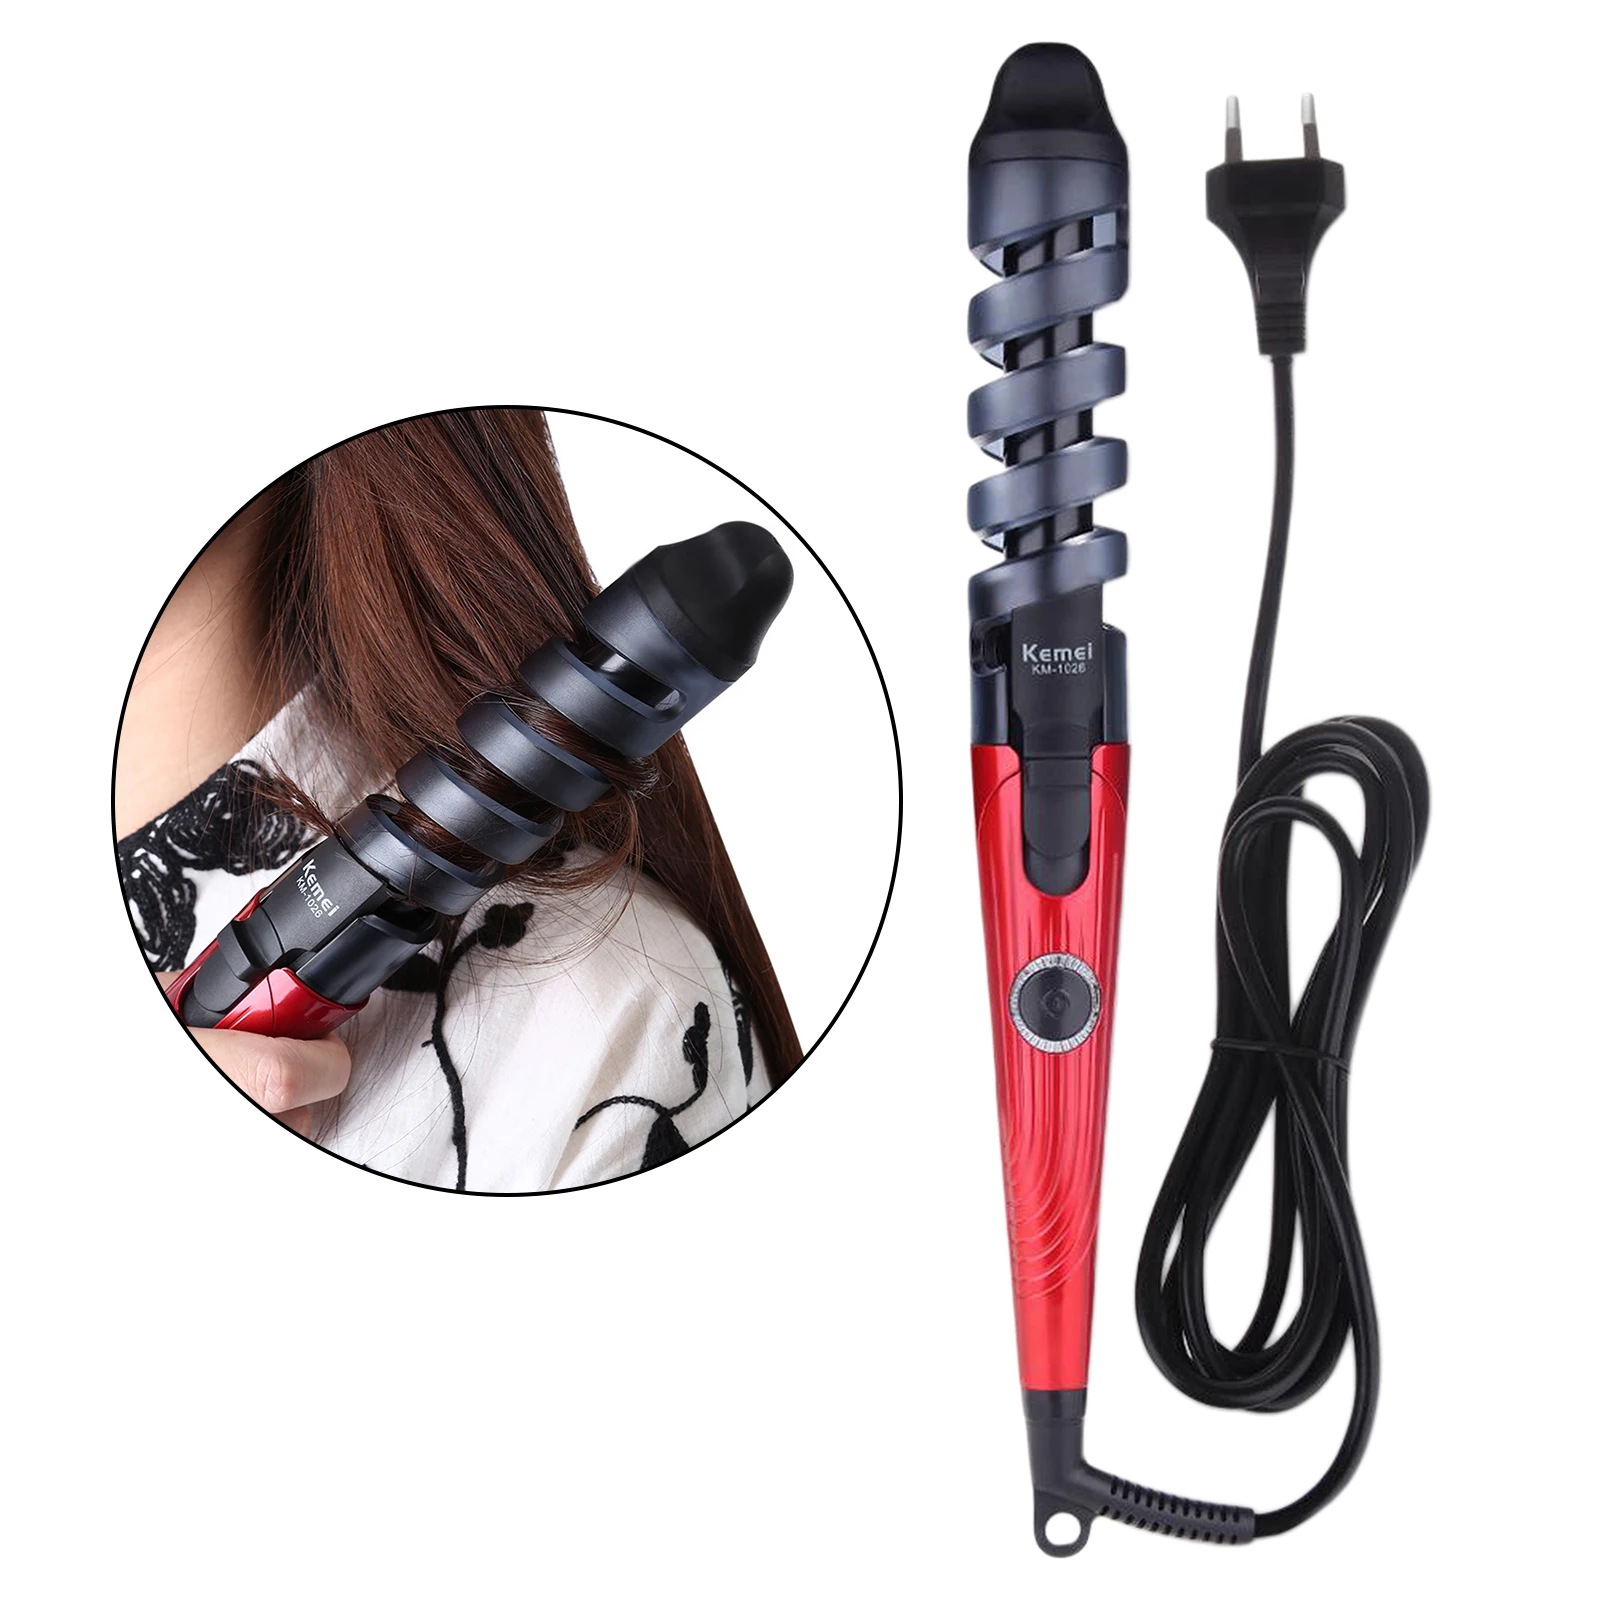 Pro Heating Hairdressing Hair Curlers Curling Wand Rod for All Hair Types Adjustable Temperature Spiral Hair Curling Iron